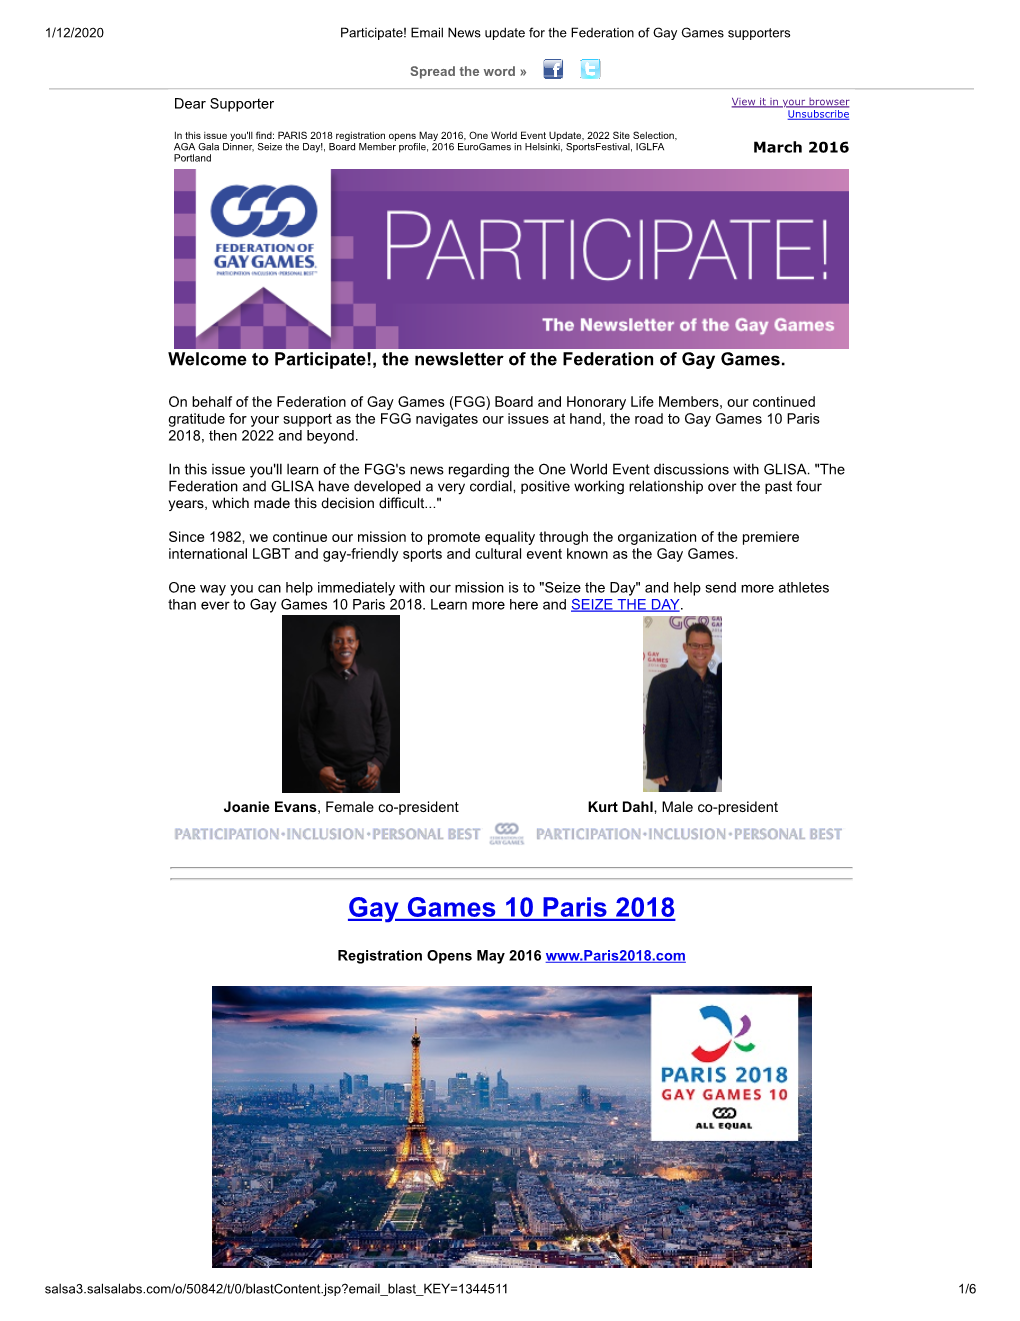 Gay Games 10 Paris 2018, Then 2022 and Beyond